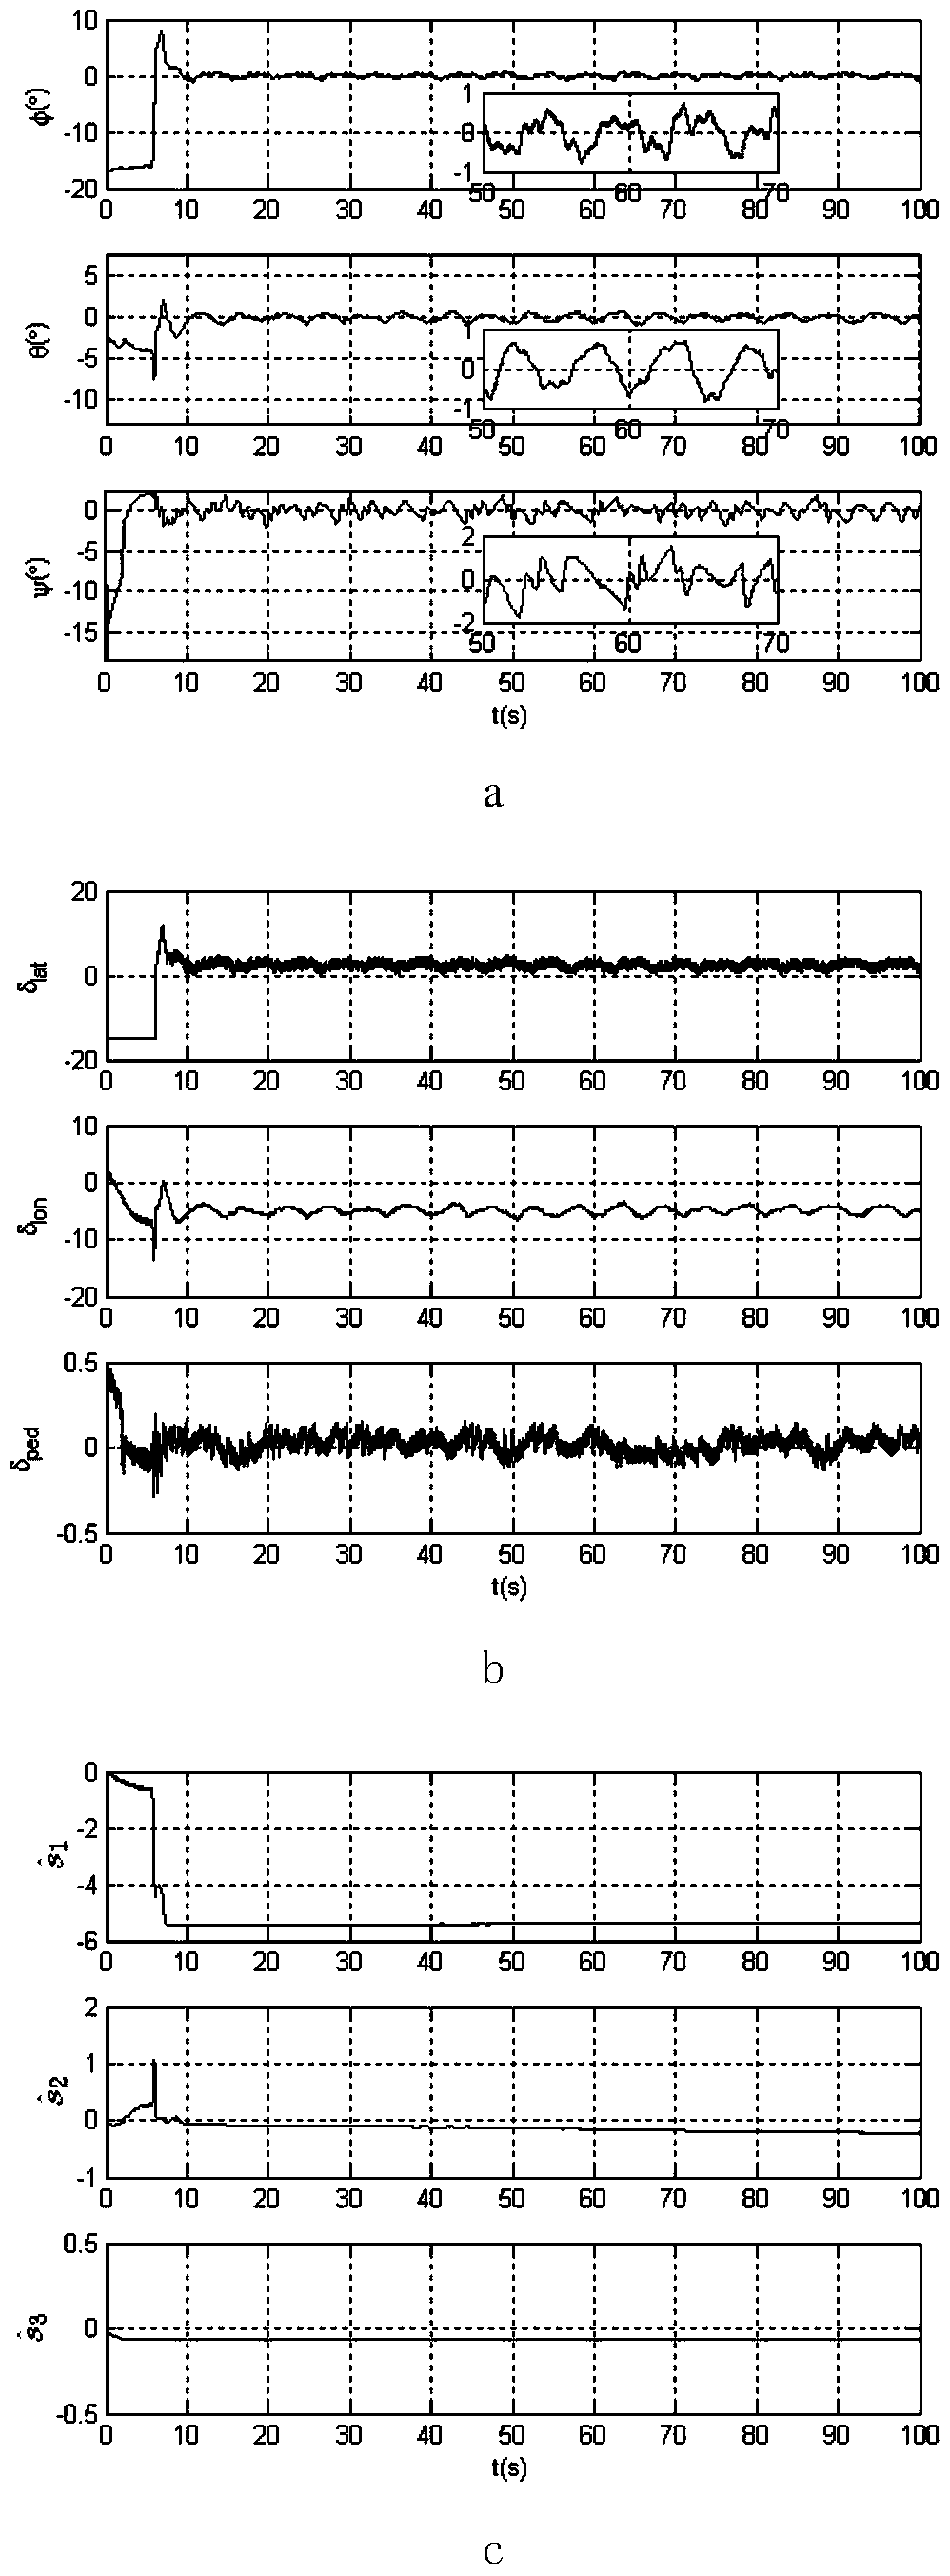 Attitude Nonlinear Adaptive Control Method for Small Unmanned Helicopter